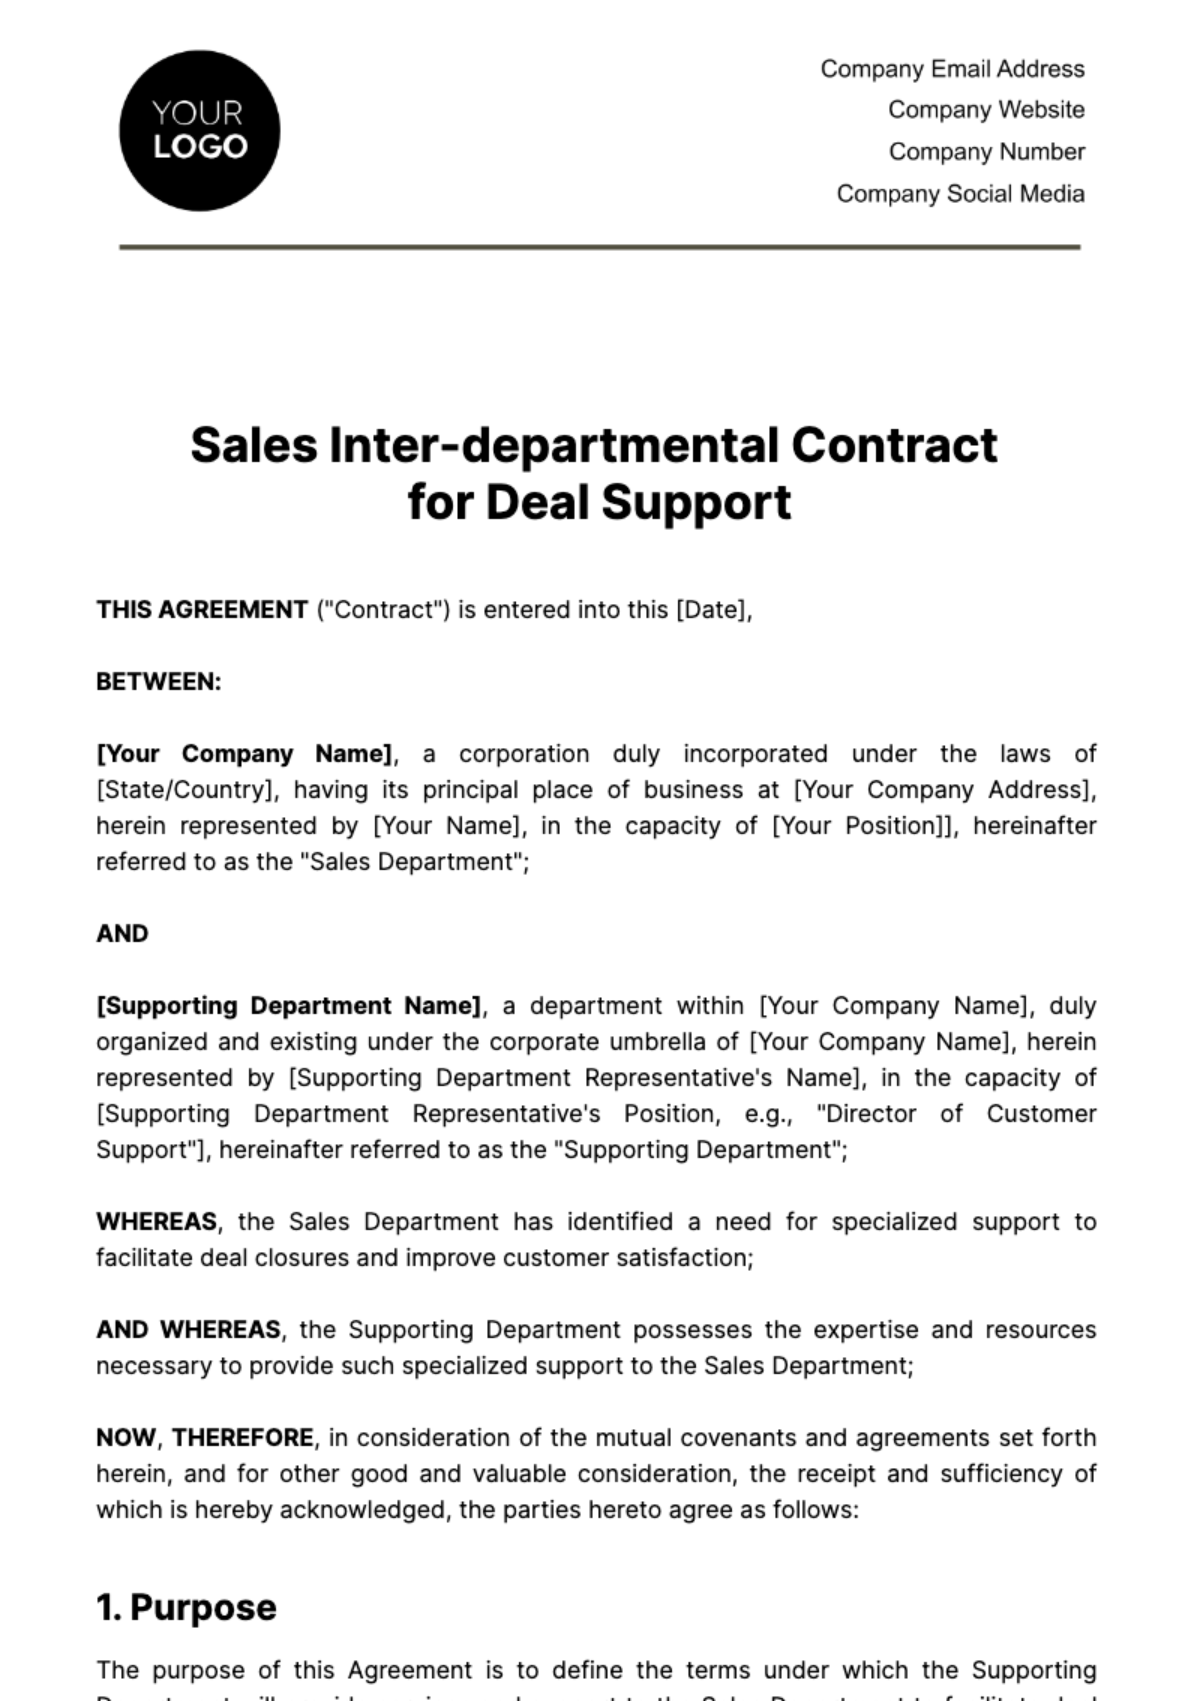 Sales Inter-departmental Contract for Deal Support Template